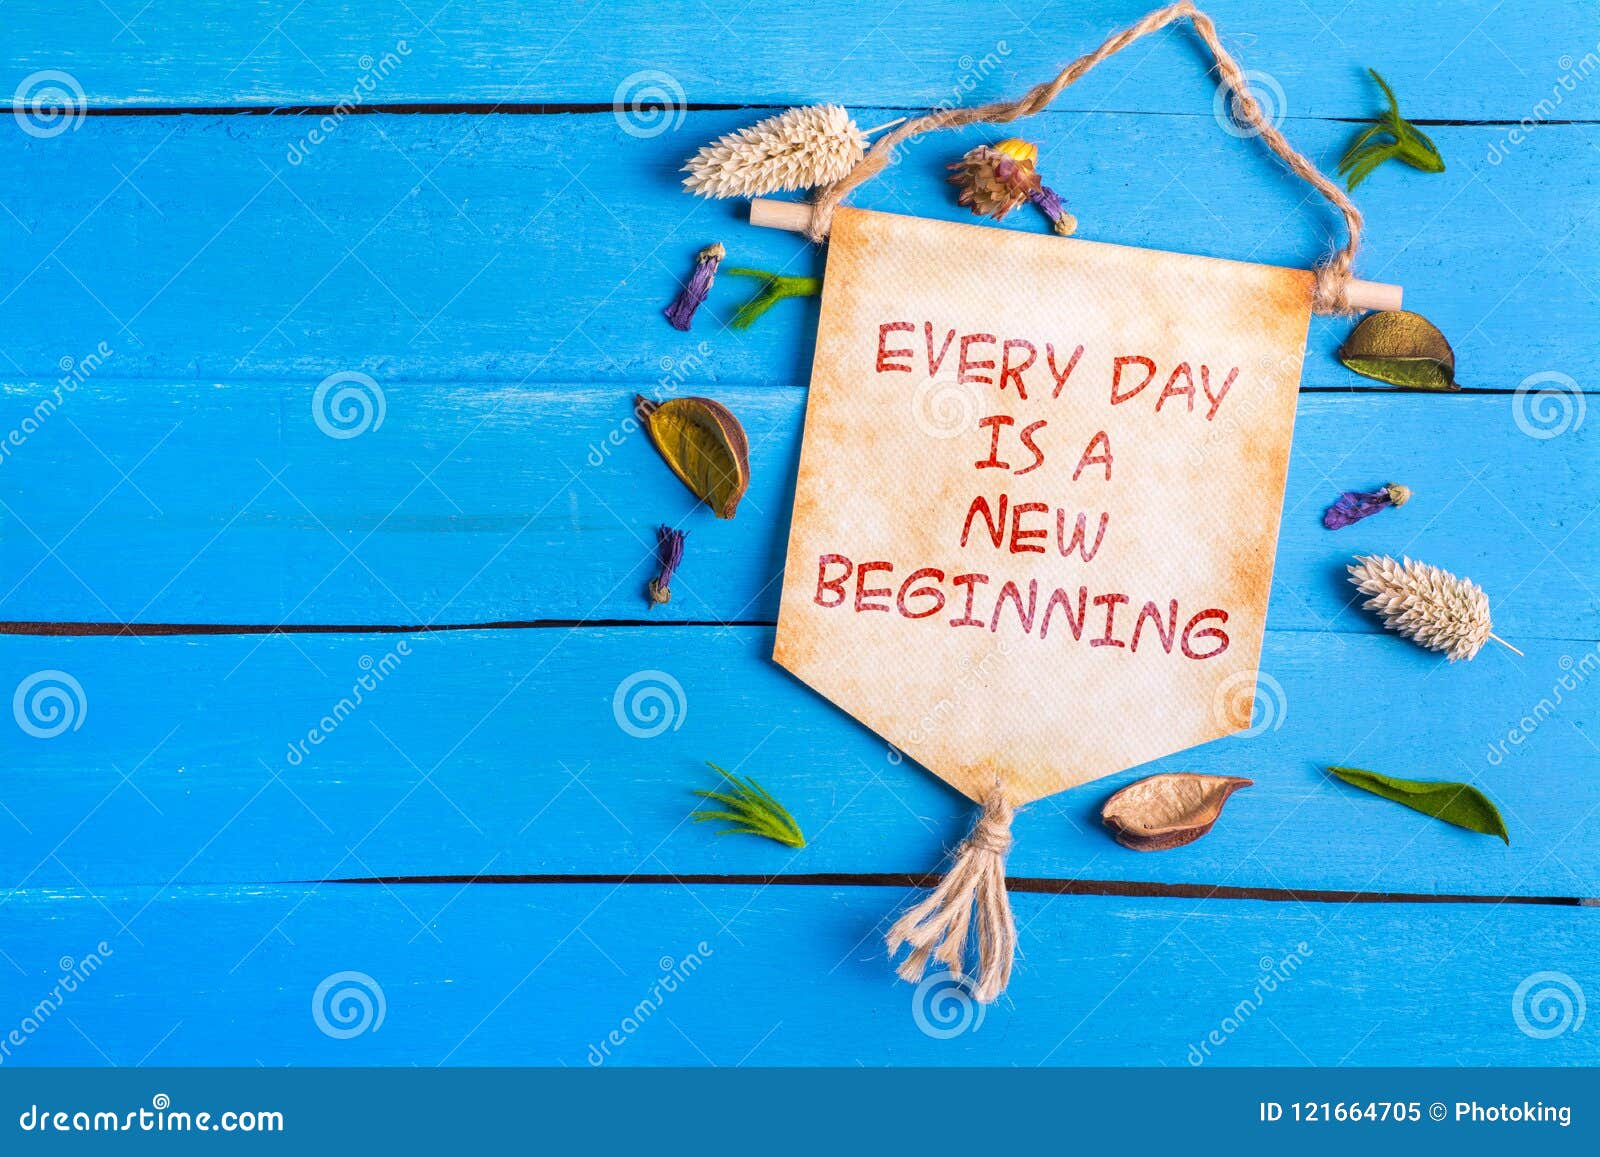 every day is a new beginning text on paper scroll